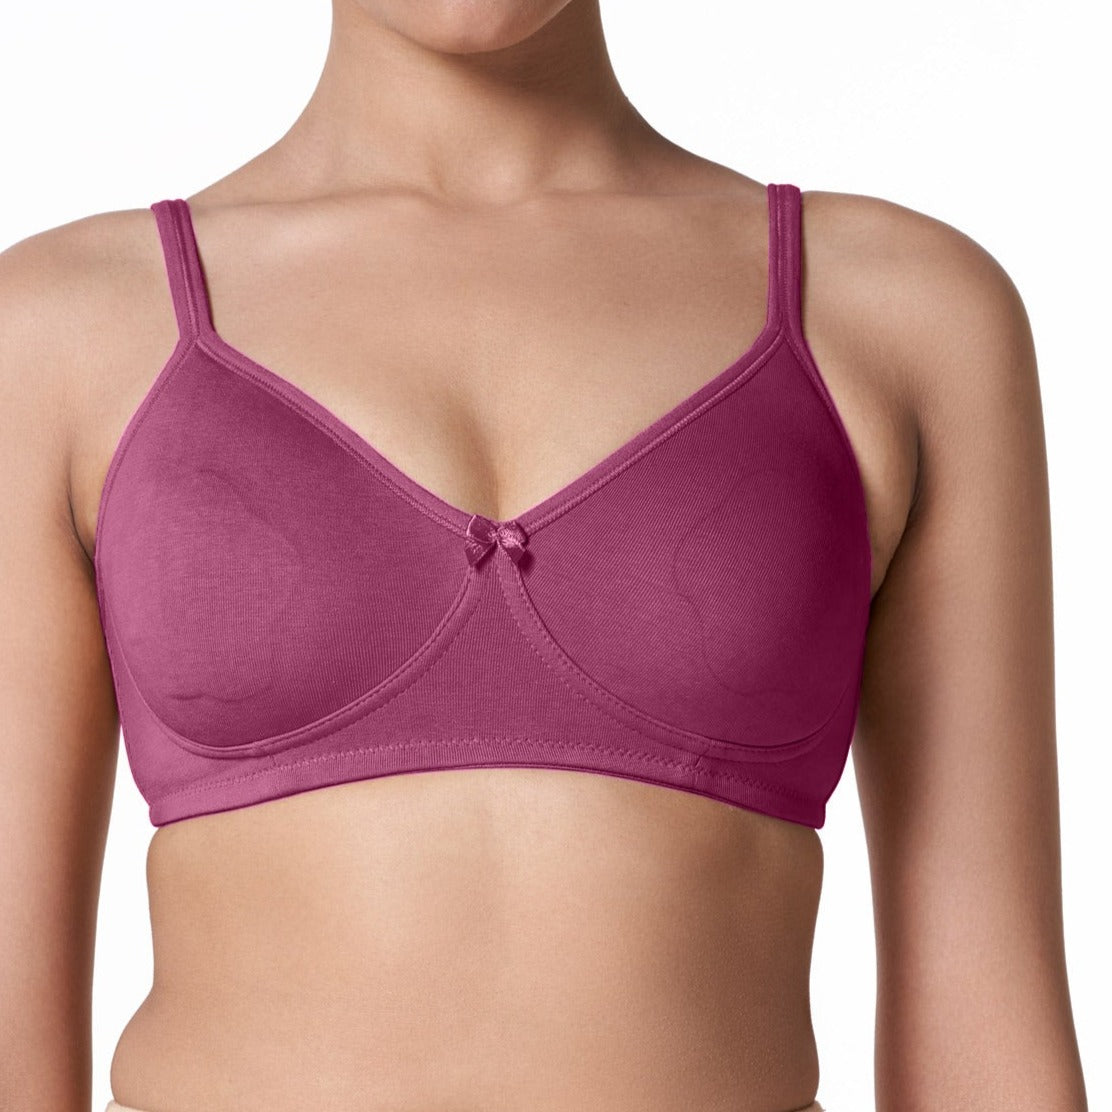 blossom-ultimate bra-pickle beet4-Knitted-everyday bra